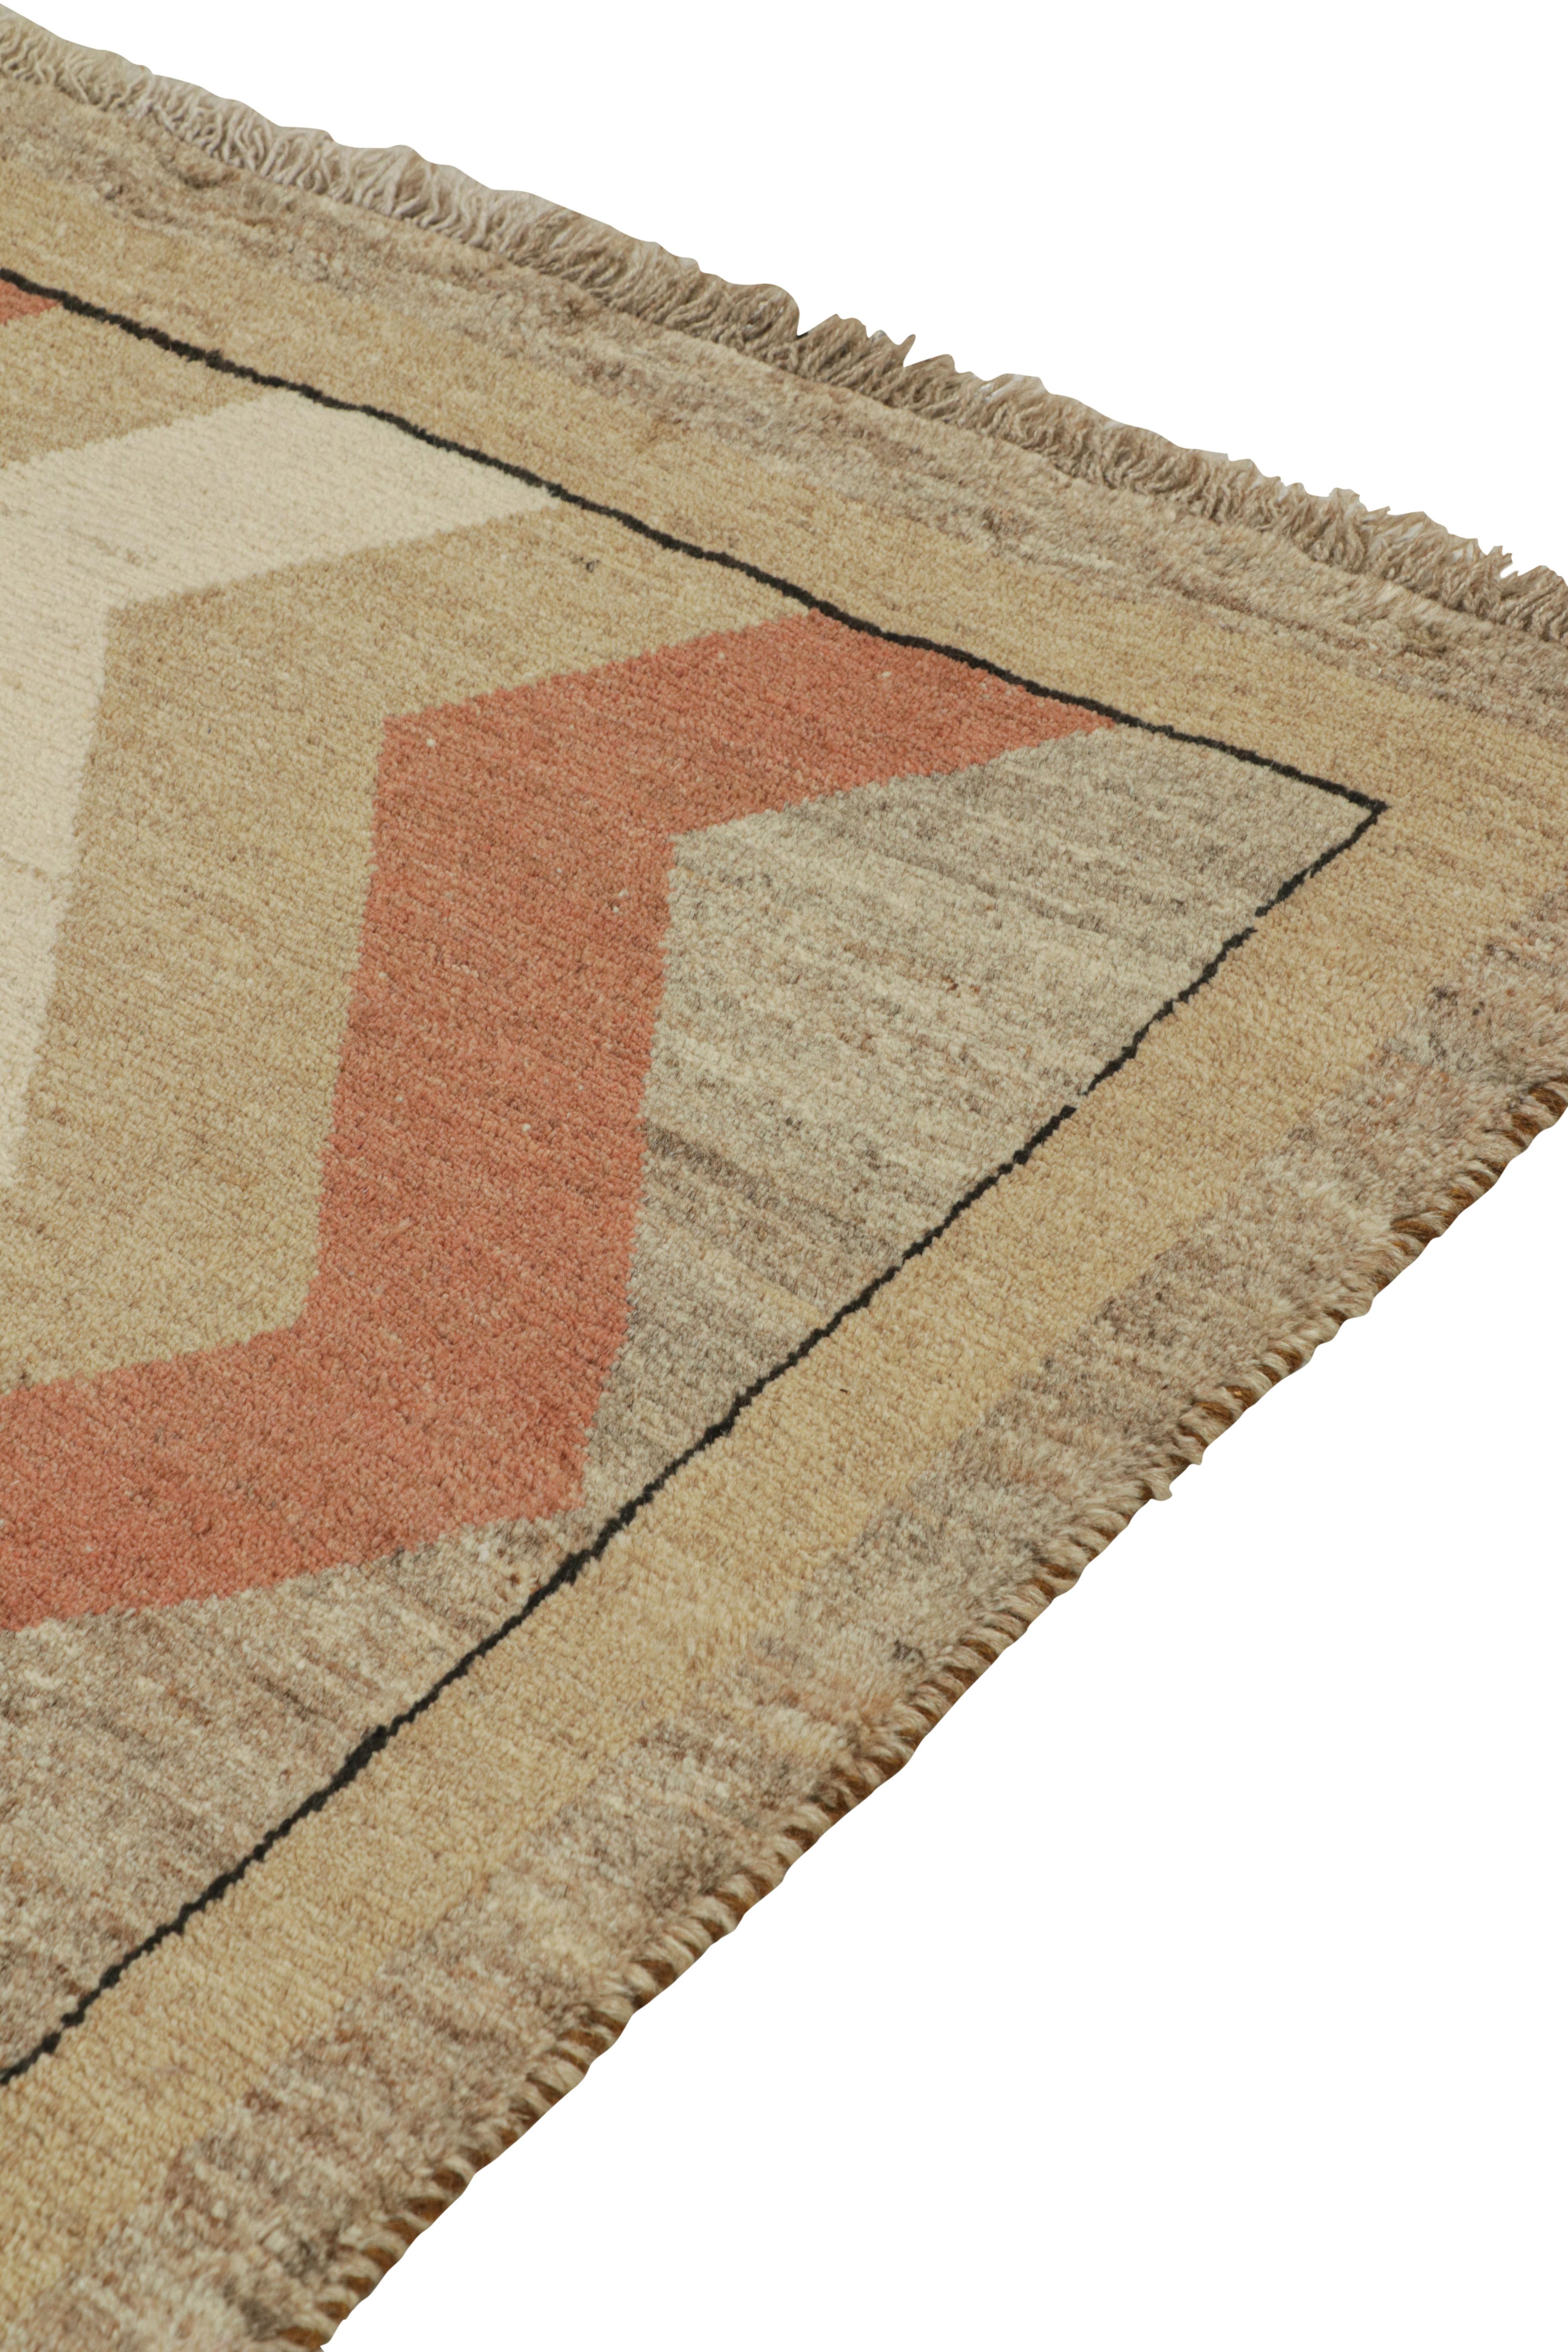 Hand-Knotted Vintage Gabbeh Rug in Beige-Brown and Red Chevron Patterns by Rug & Kilim For Sale